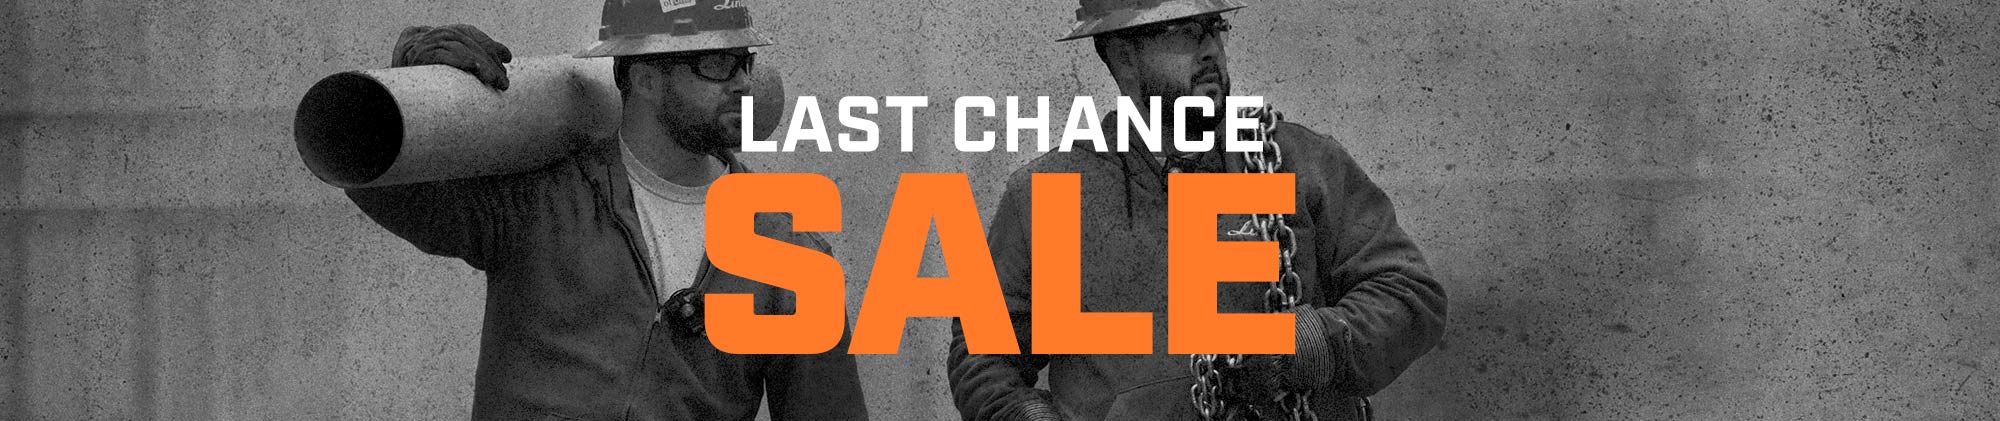 Dungarees' Last Chance Sale